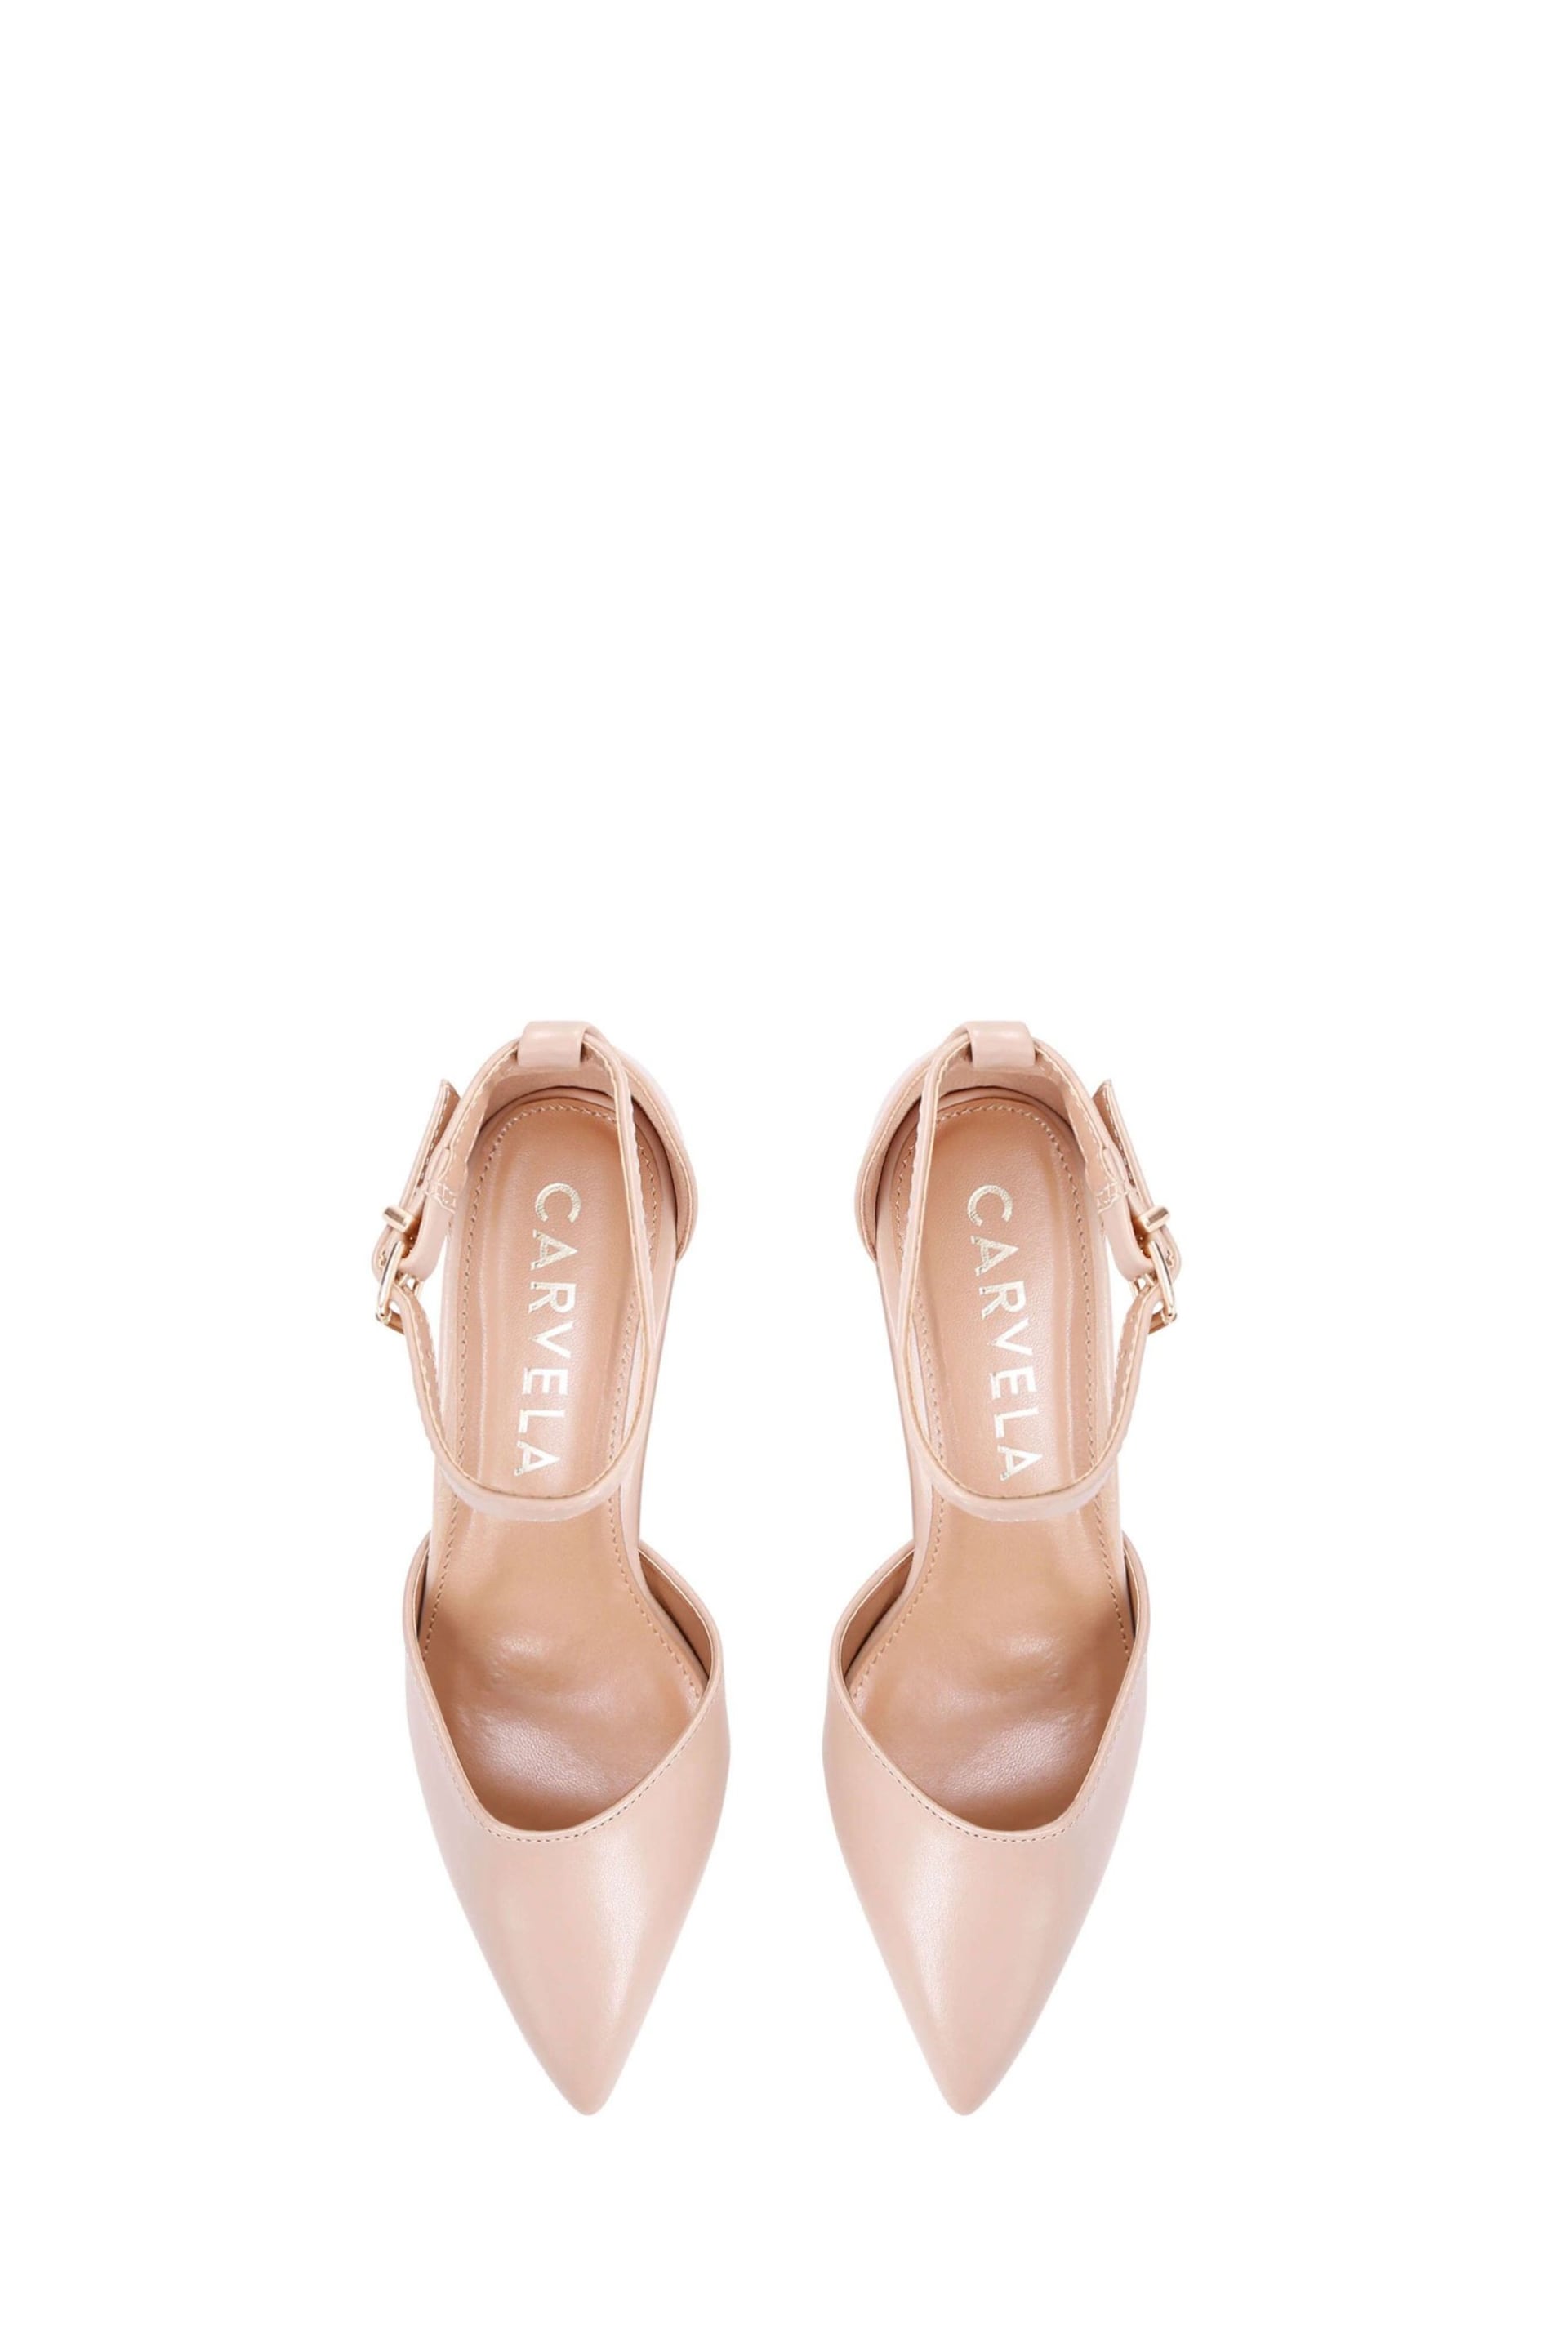 Carvela Refined Court Shoes - Image 3 of 5